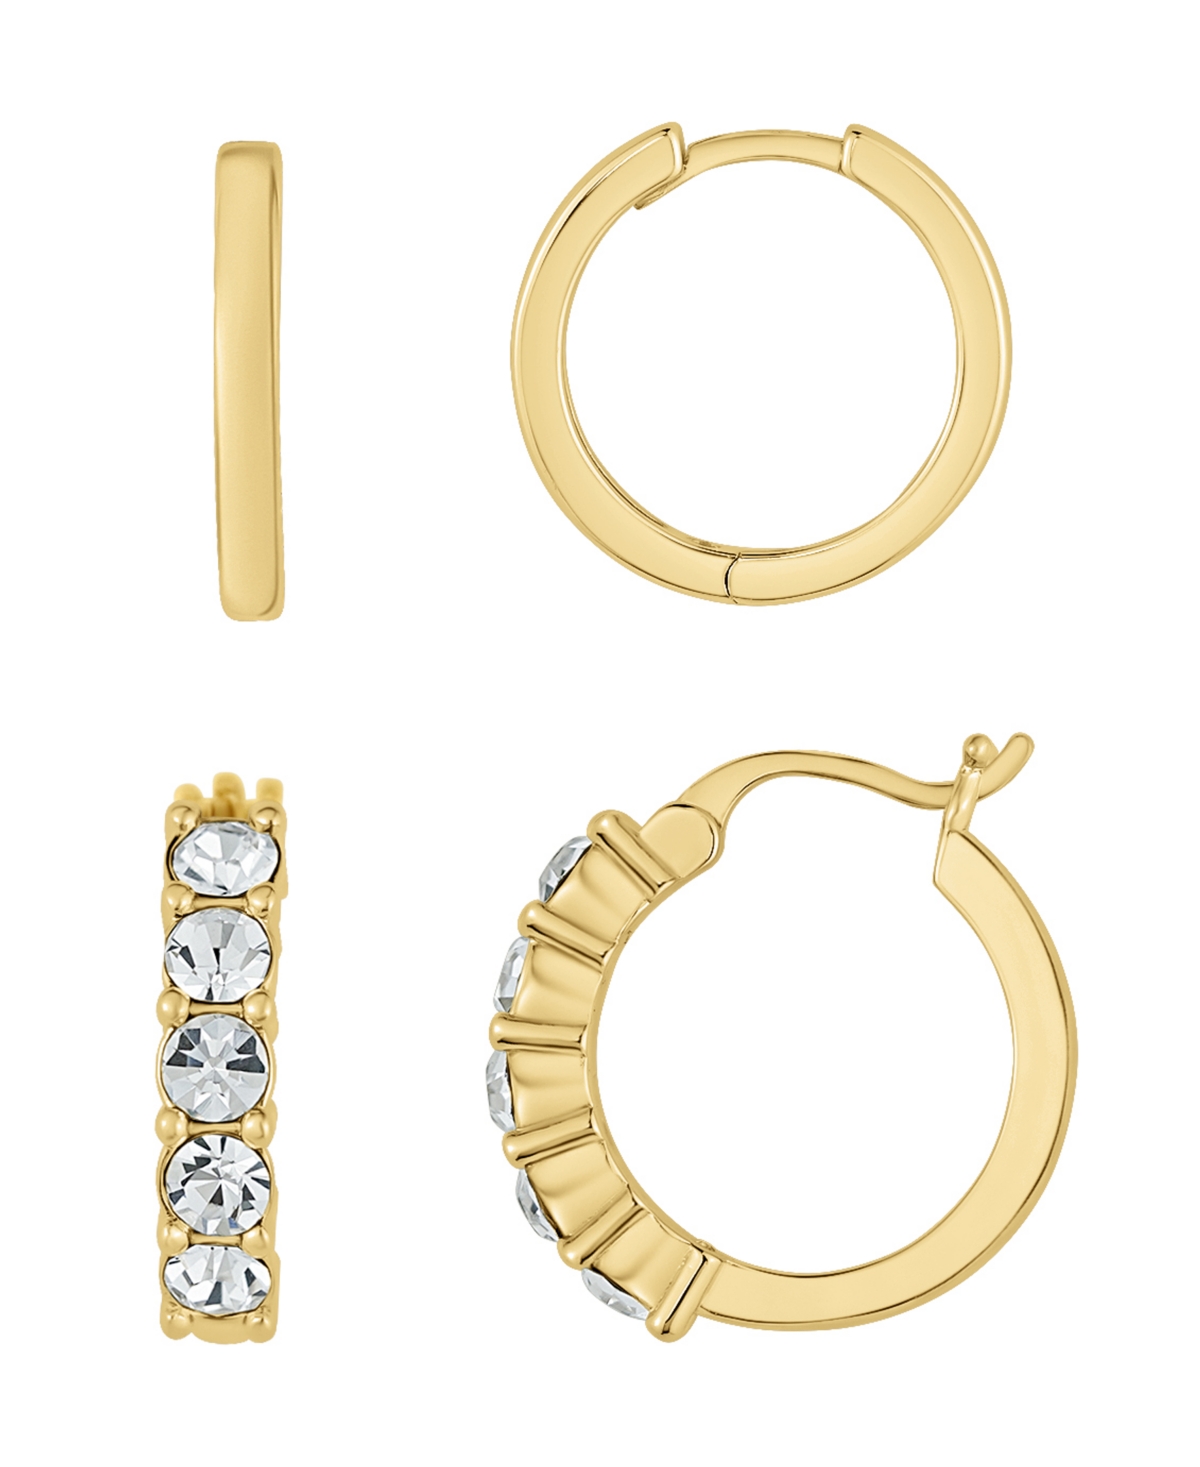 And Now This Crystal 18k Gold Plated Duo Hoop Earring Set In K Gold Plate Over Brass